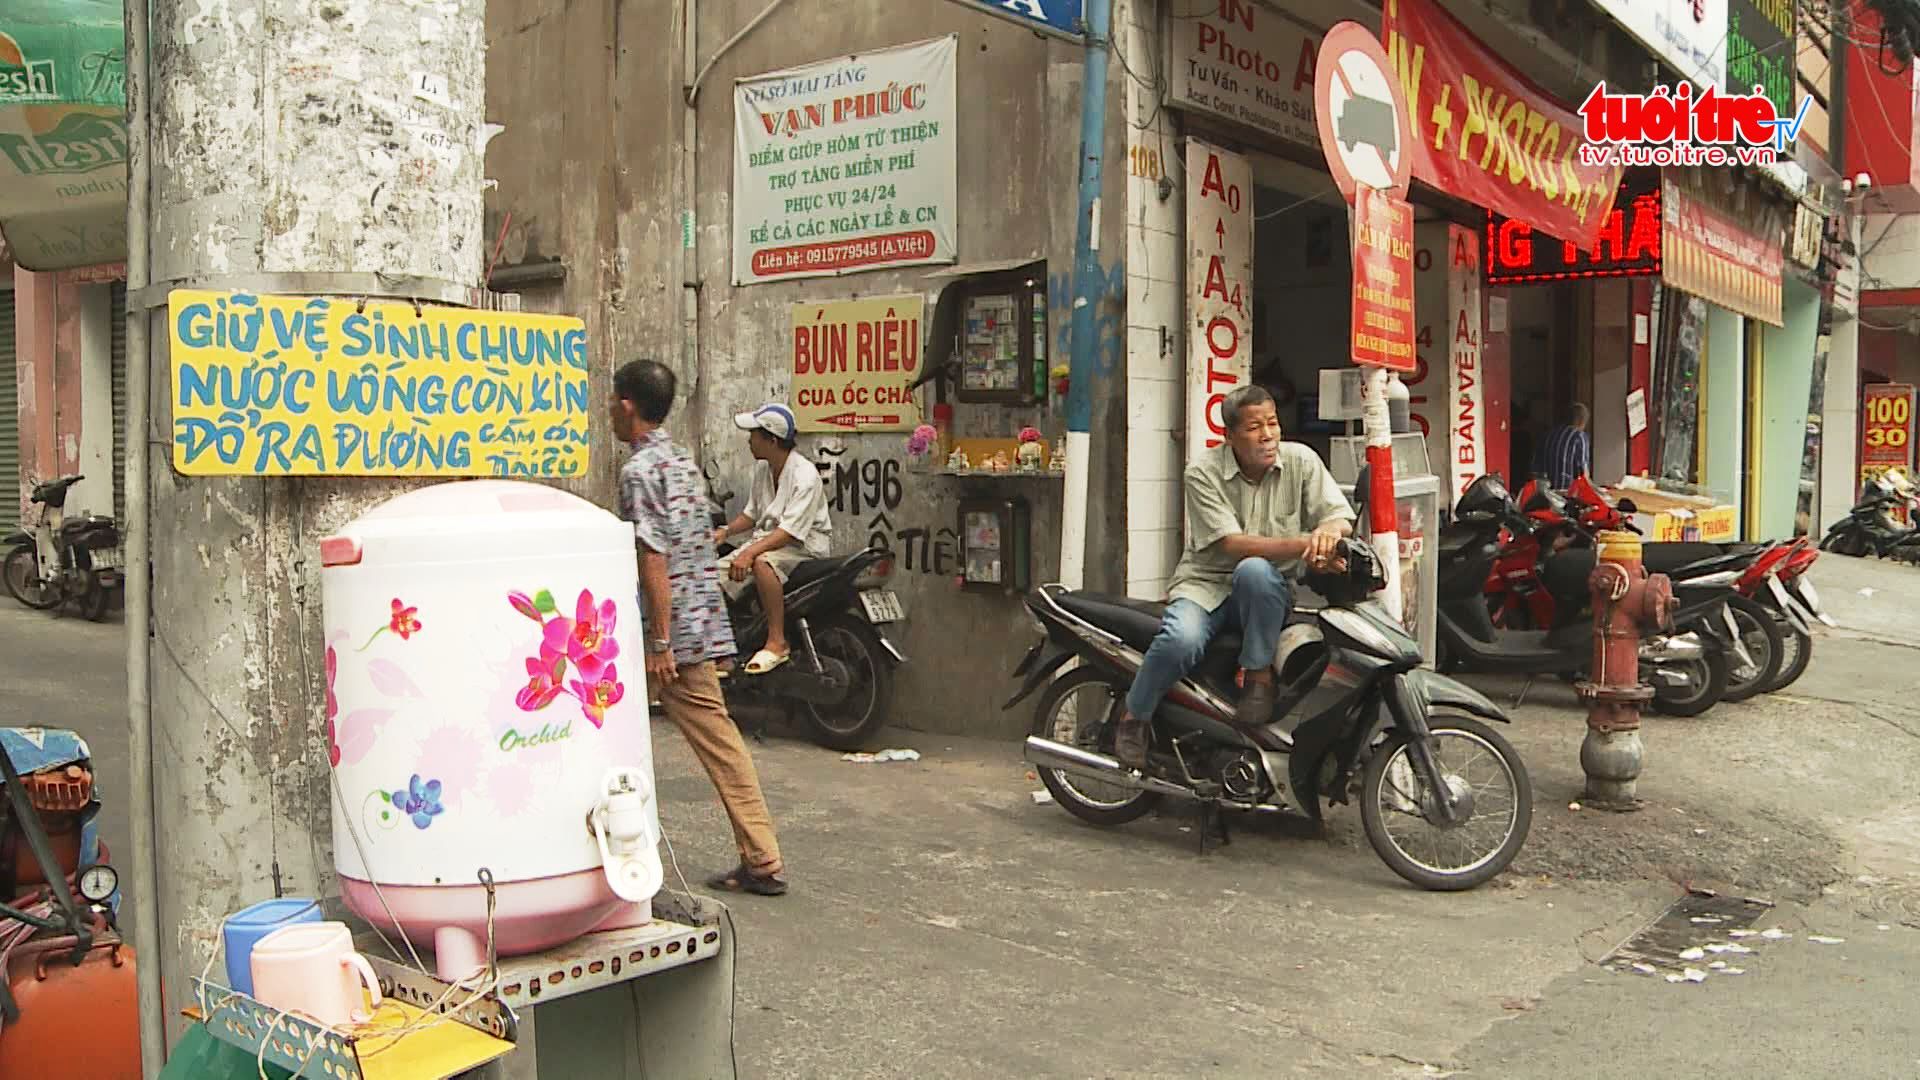 A ‘free-of-charge alley’ in Saigon